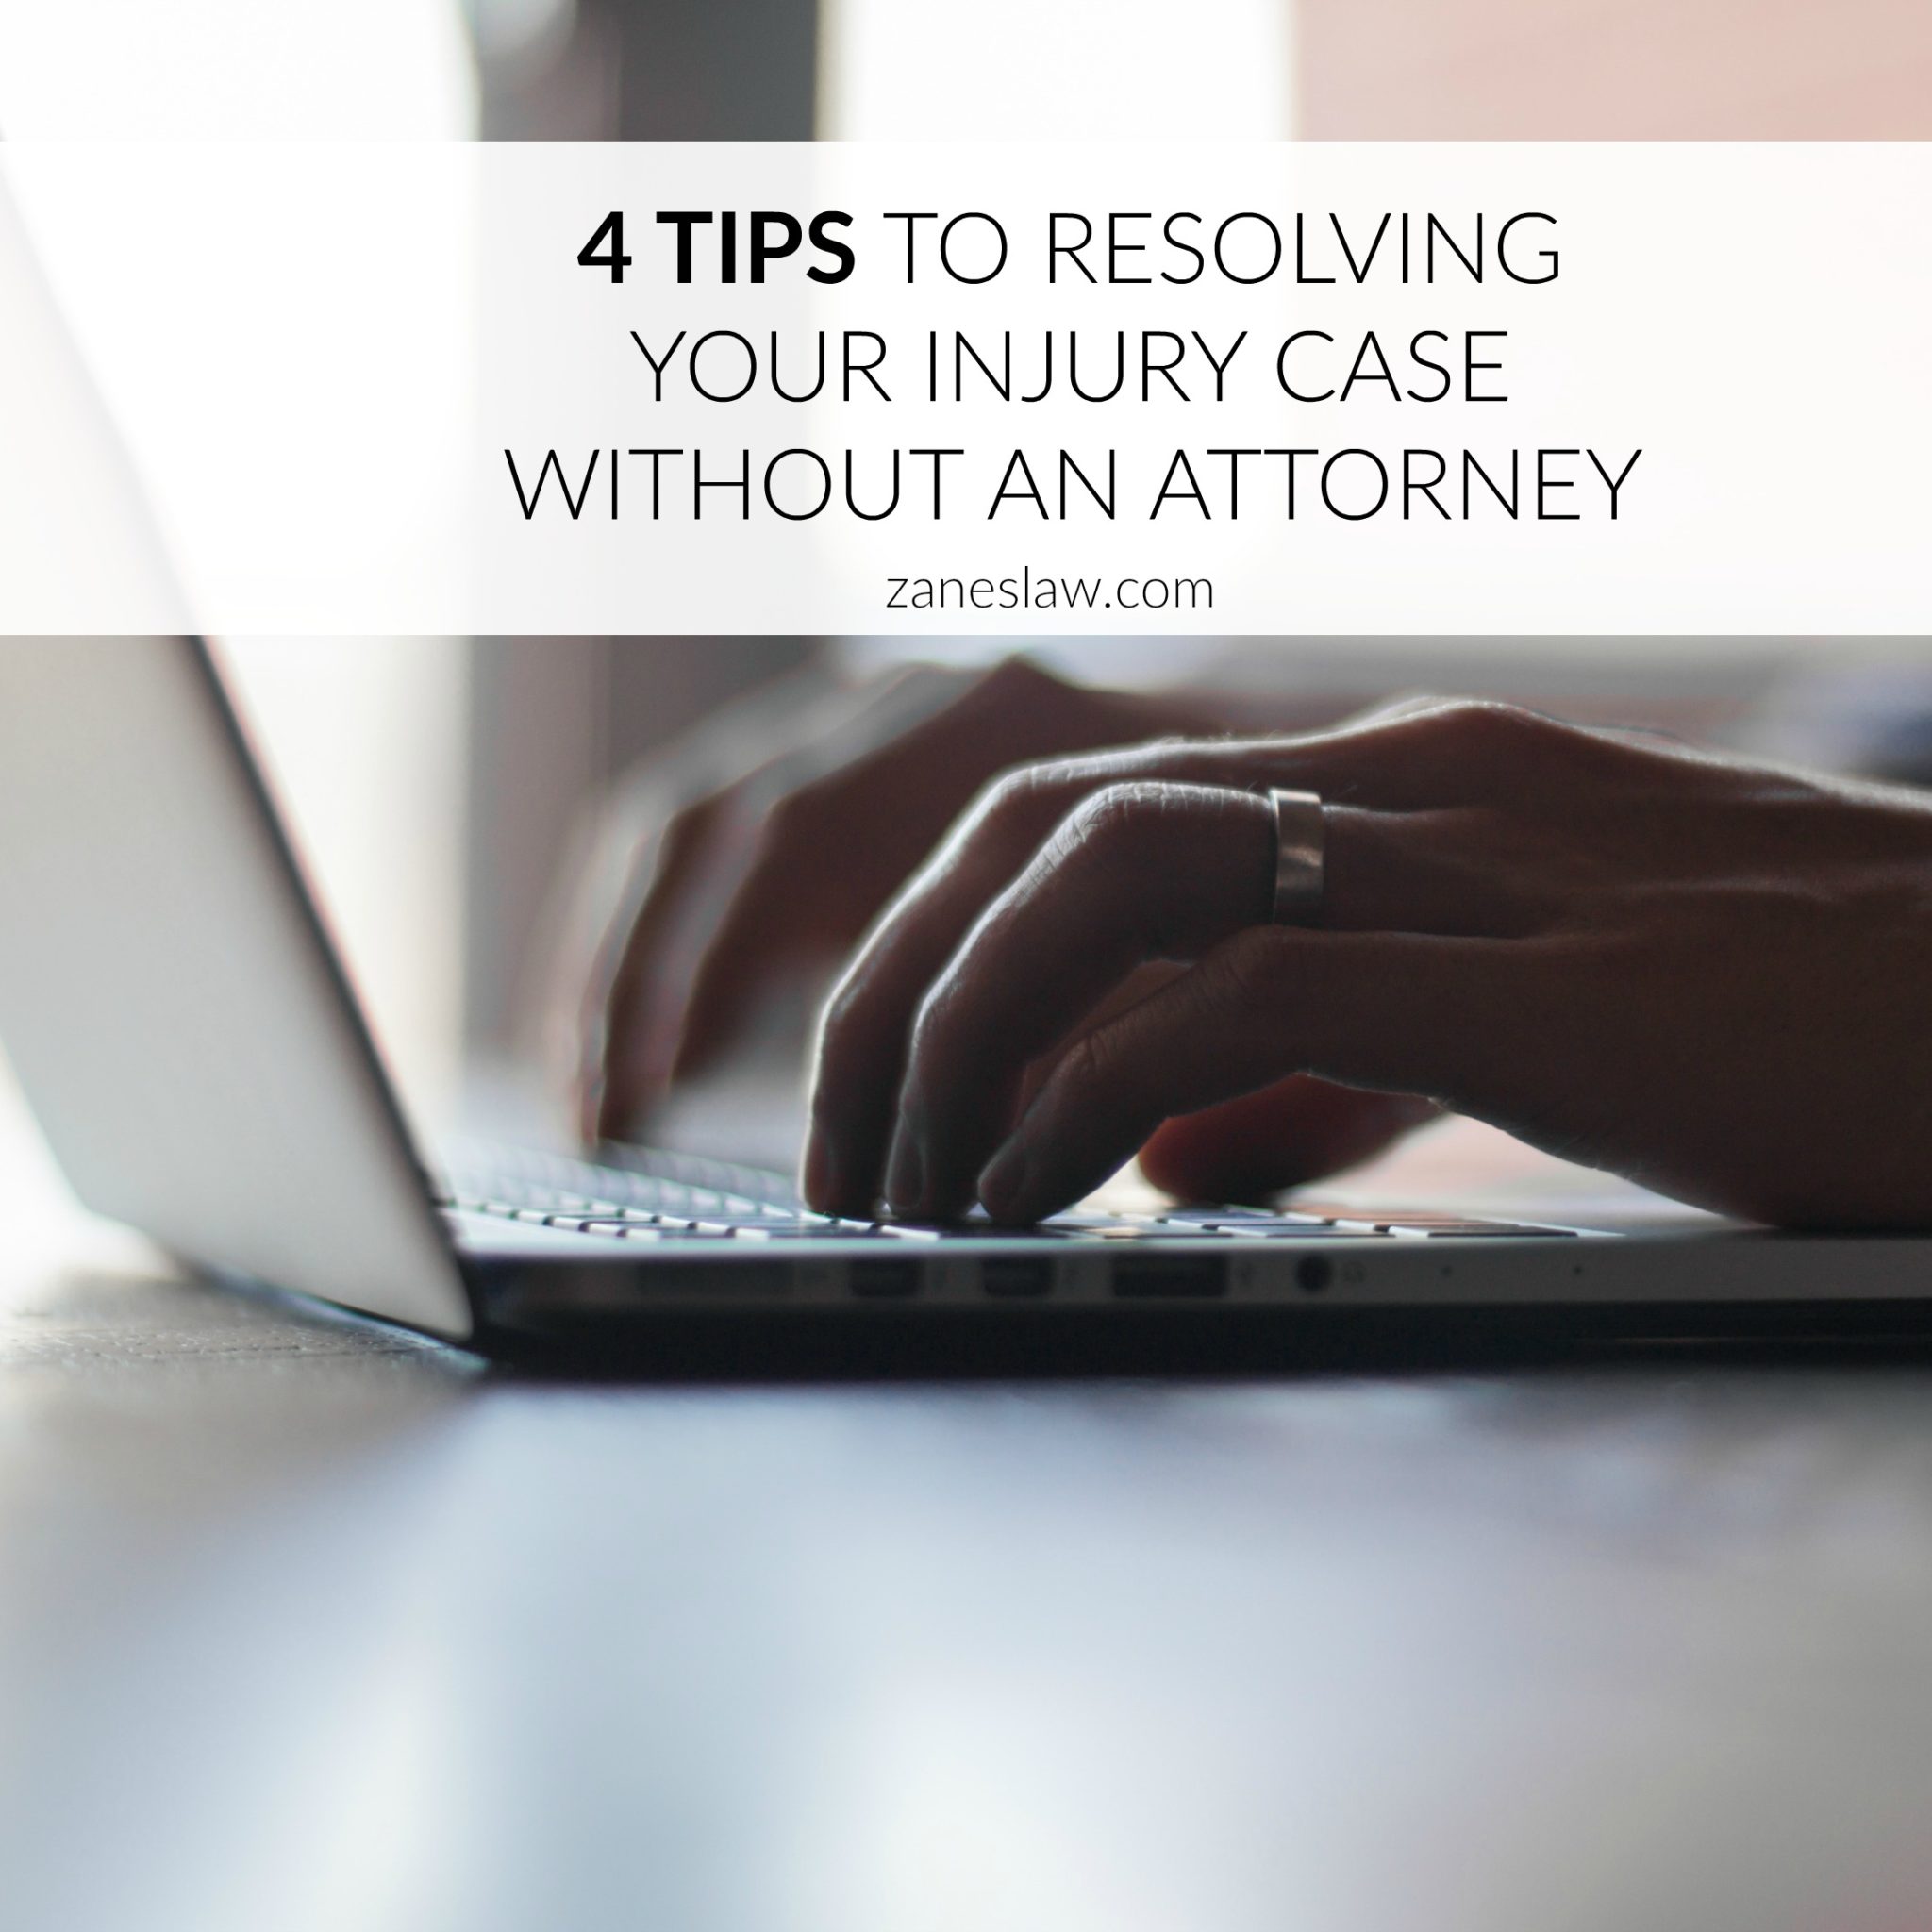 4 TIPS TO RESOLVING YOUR INJURY CASE WITHOUT AN ATTORNEY